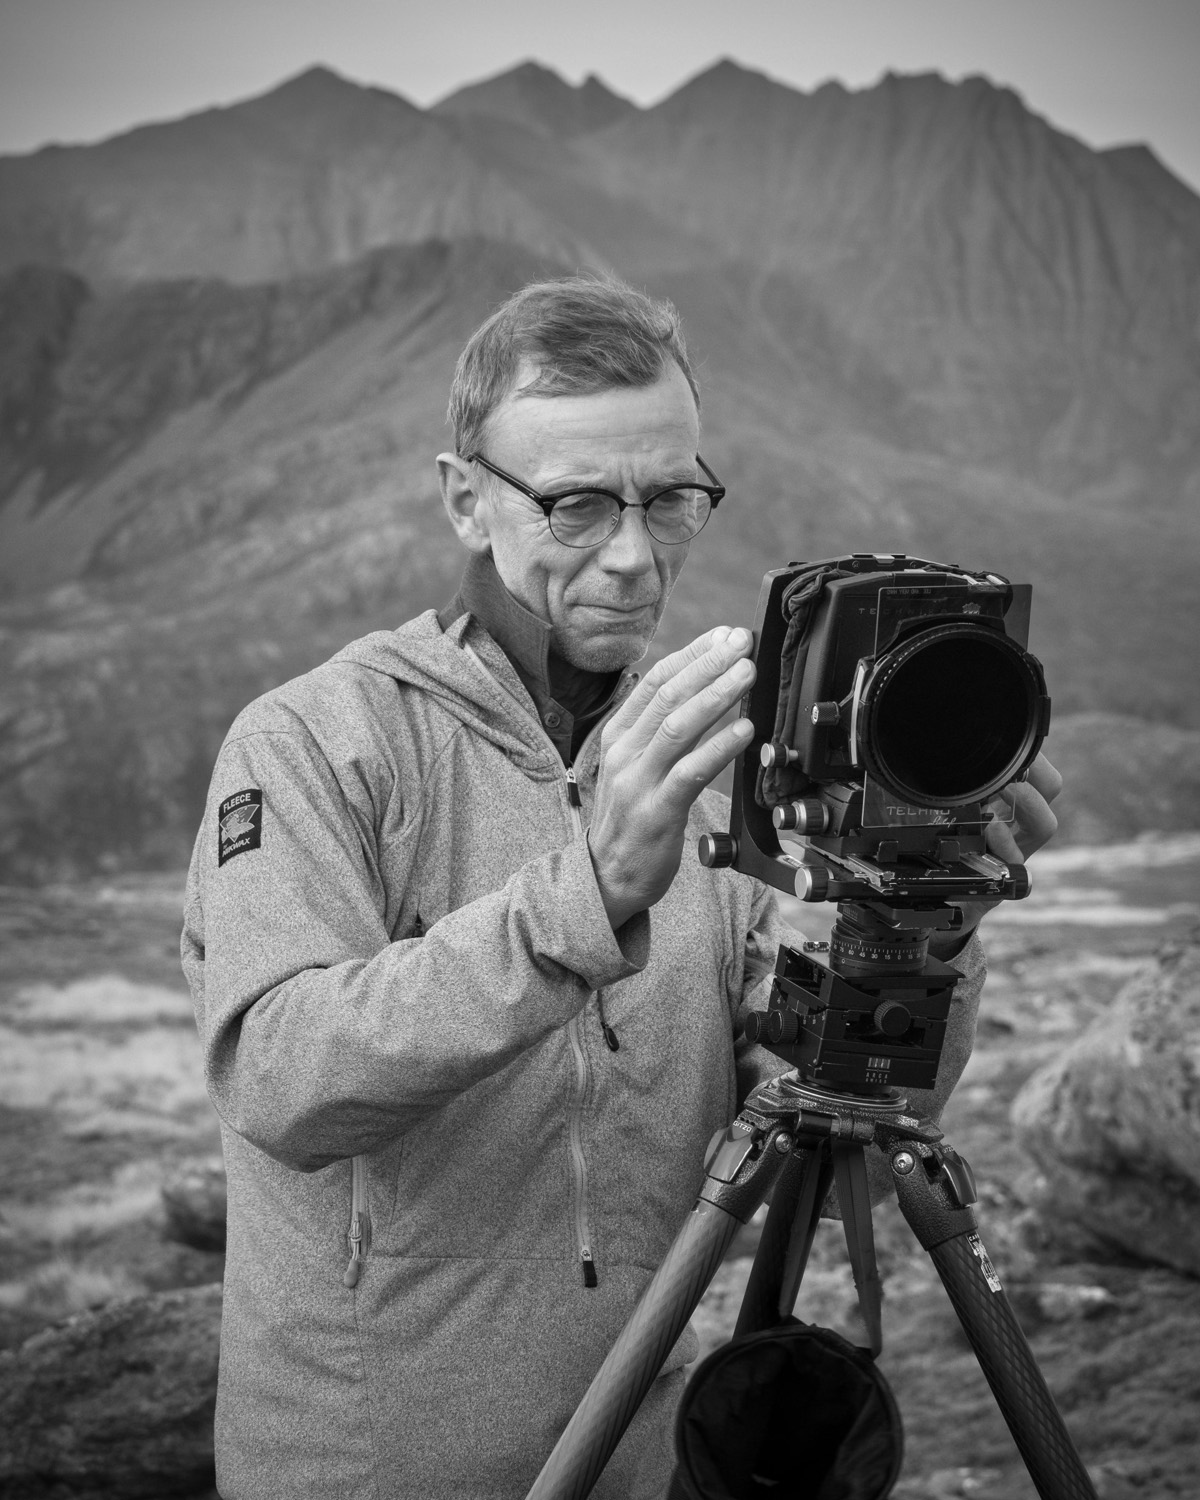 Black and white portrait of Joe Cornish, a mature, bespectacled man, thoughtfully inspecting his large format camera perched on a tripod. He stands in a rugged outdoor setting with a backdrop of dramatic mountain ranges, embodying a focused and professional demeanor.